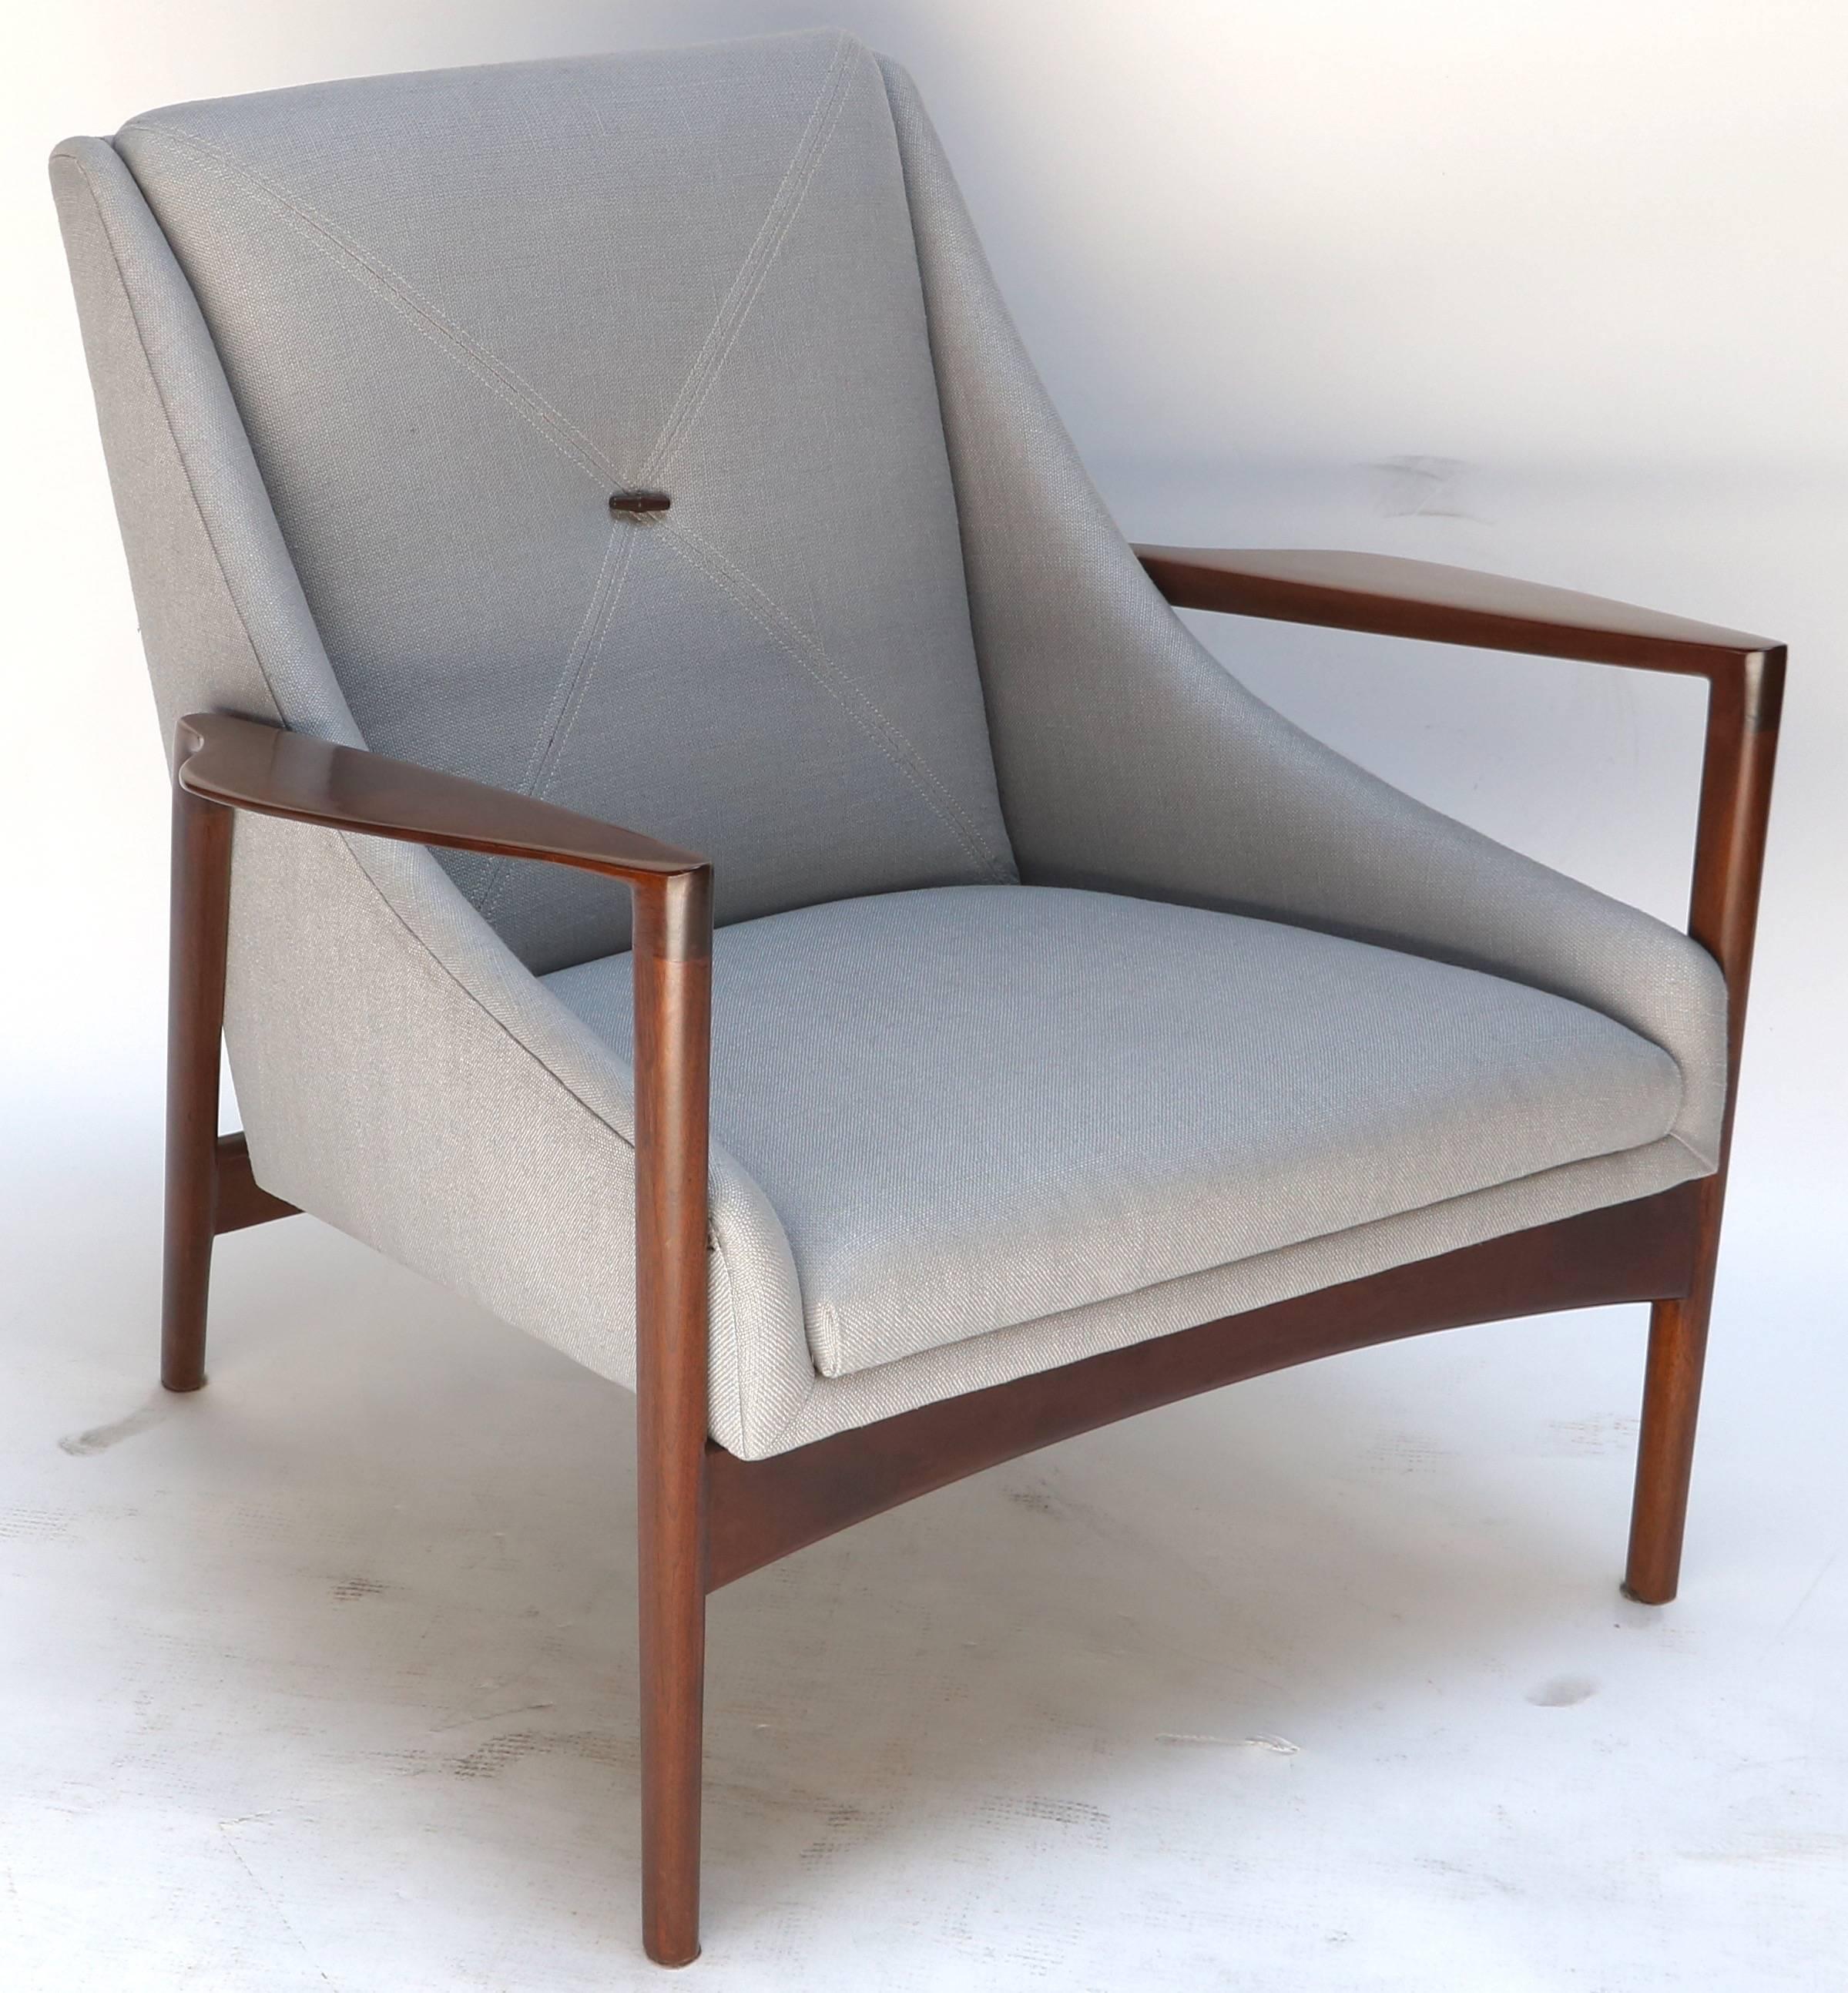 Pair of 1950s lounge chairs or armchairs by Ib Kofod-Larsen upholstered in grey linen with detail stitching.